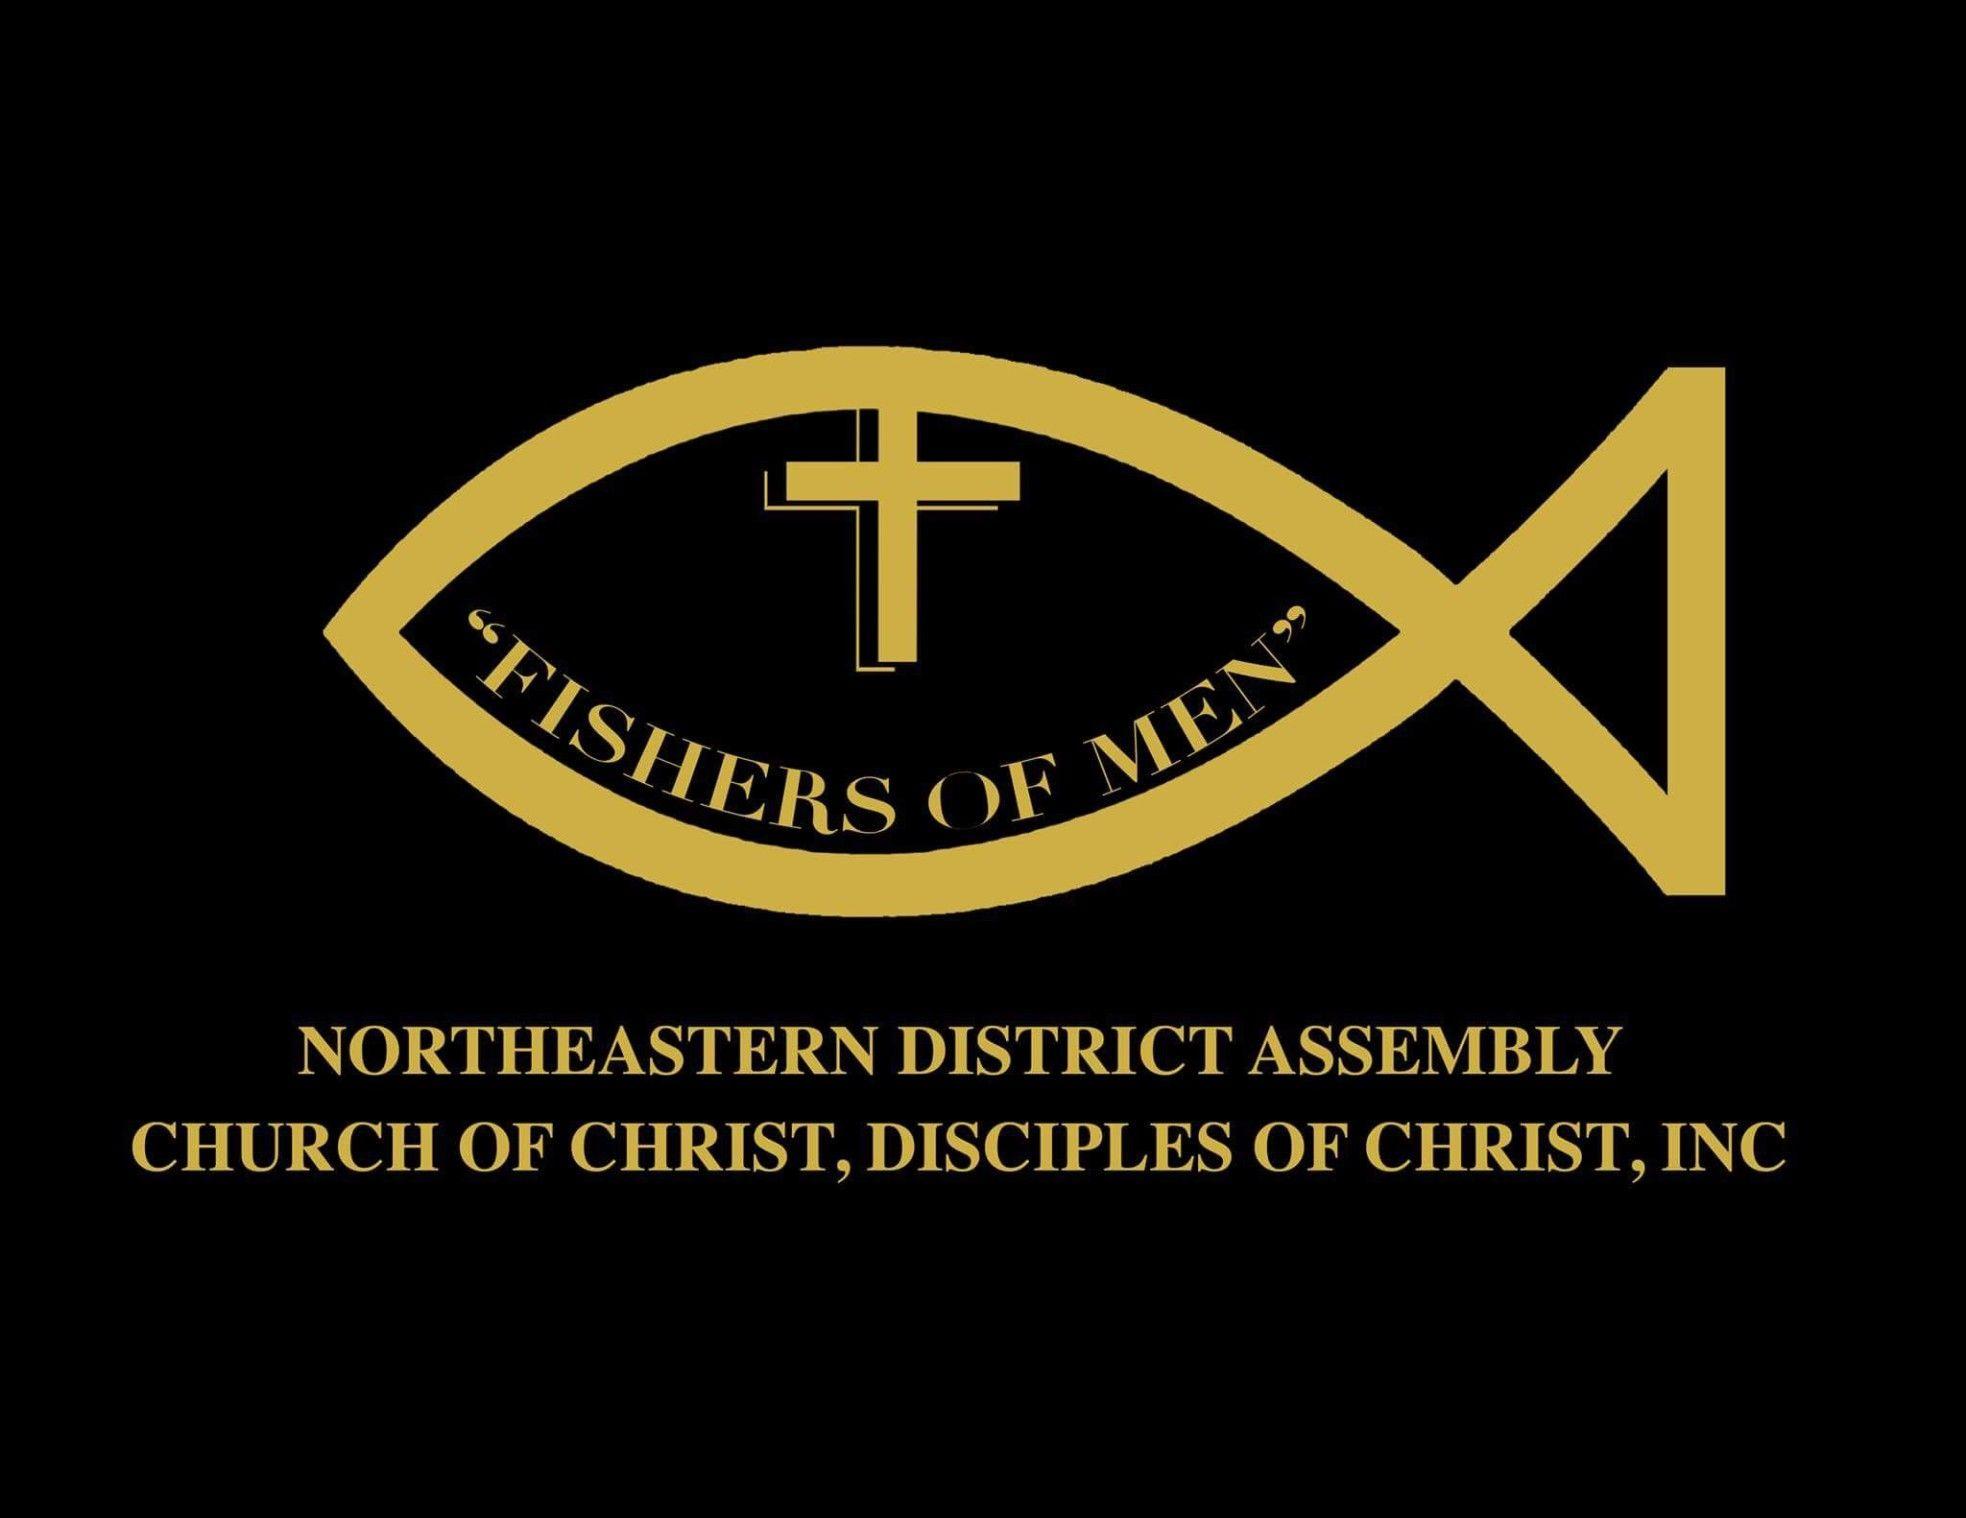 Disciples Church Logo - The Northeastern District Assembly Church of Christ, Disciples